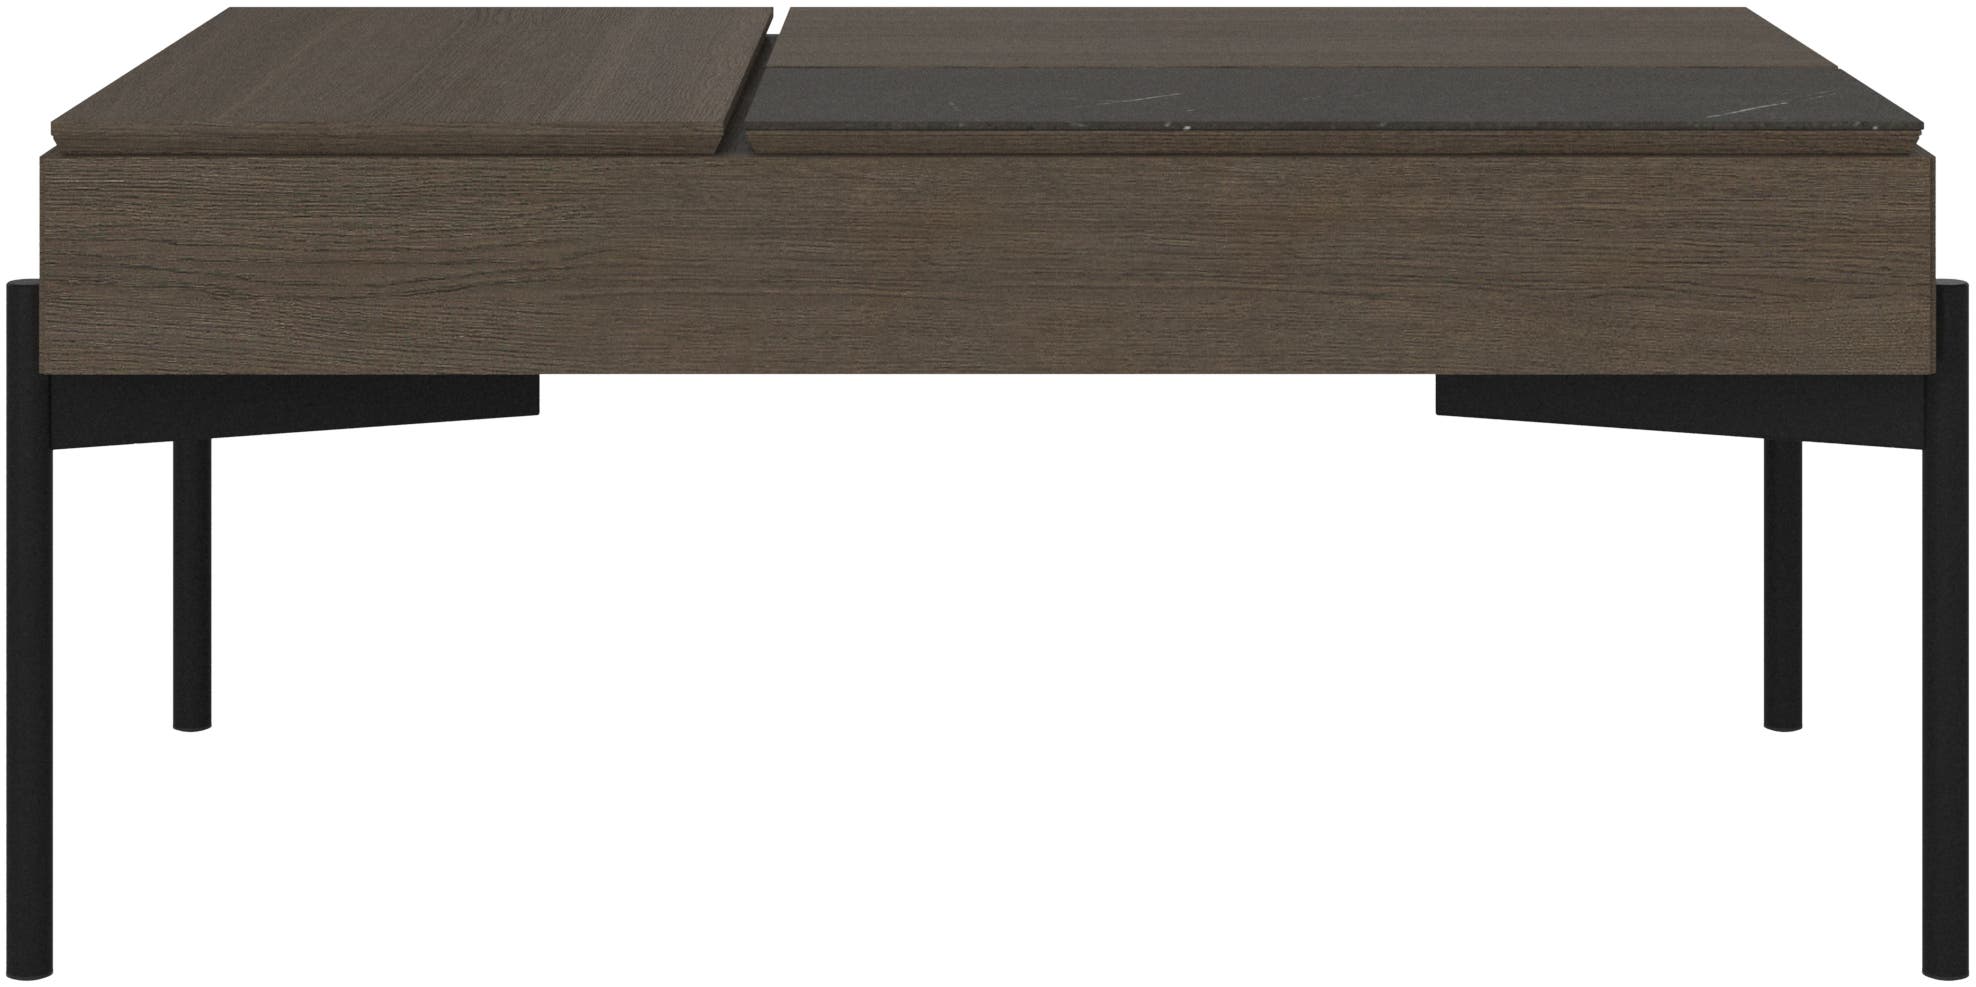 Chiva functional coffee table with storage